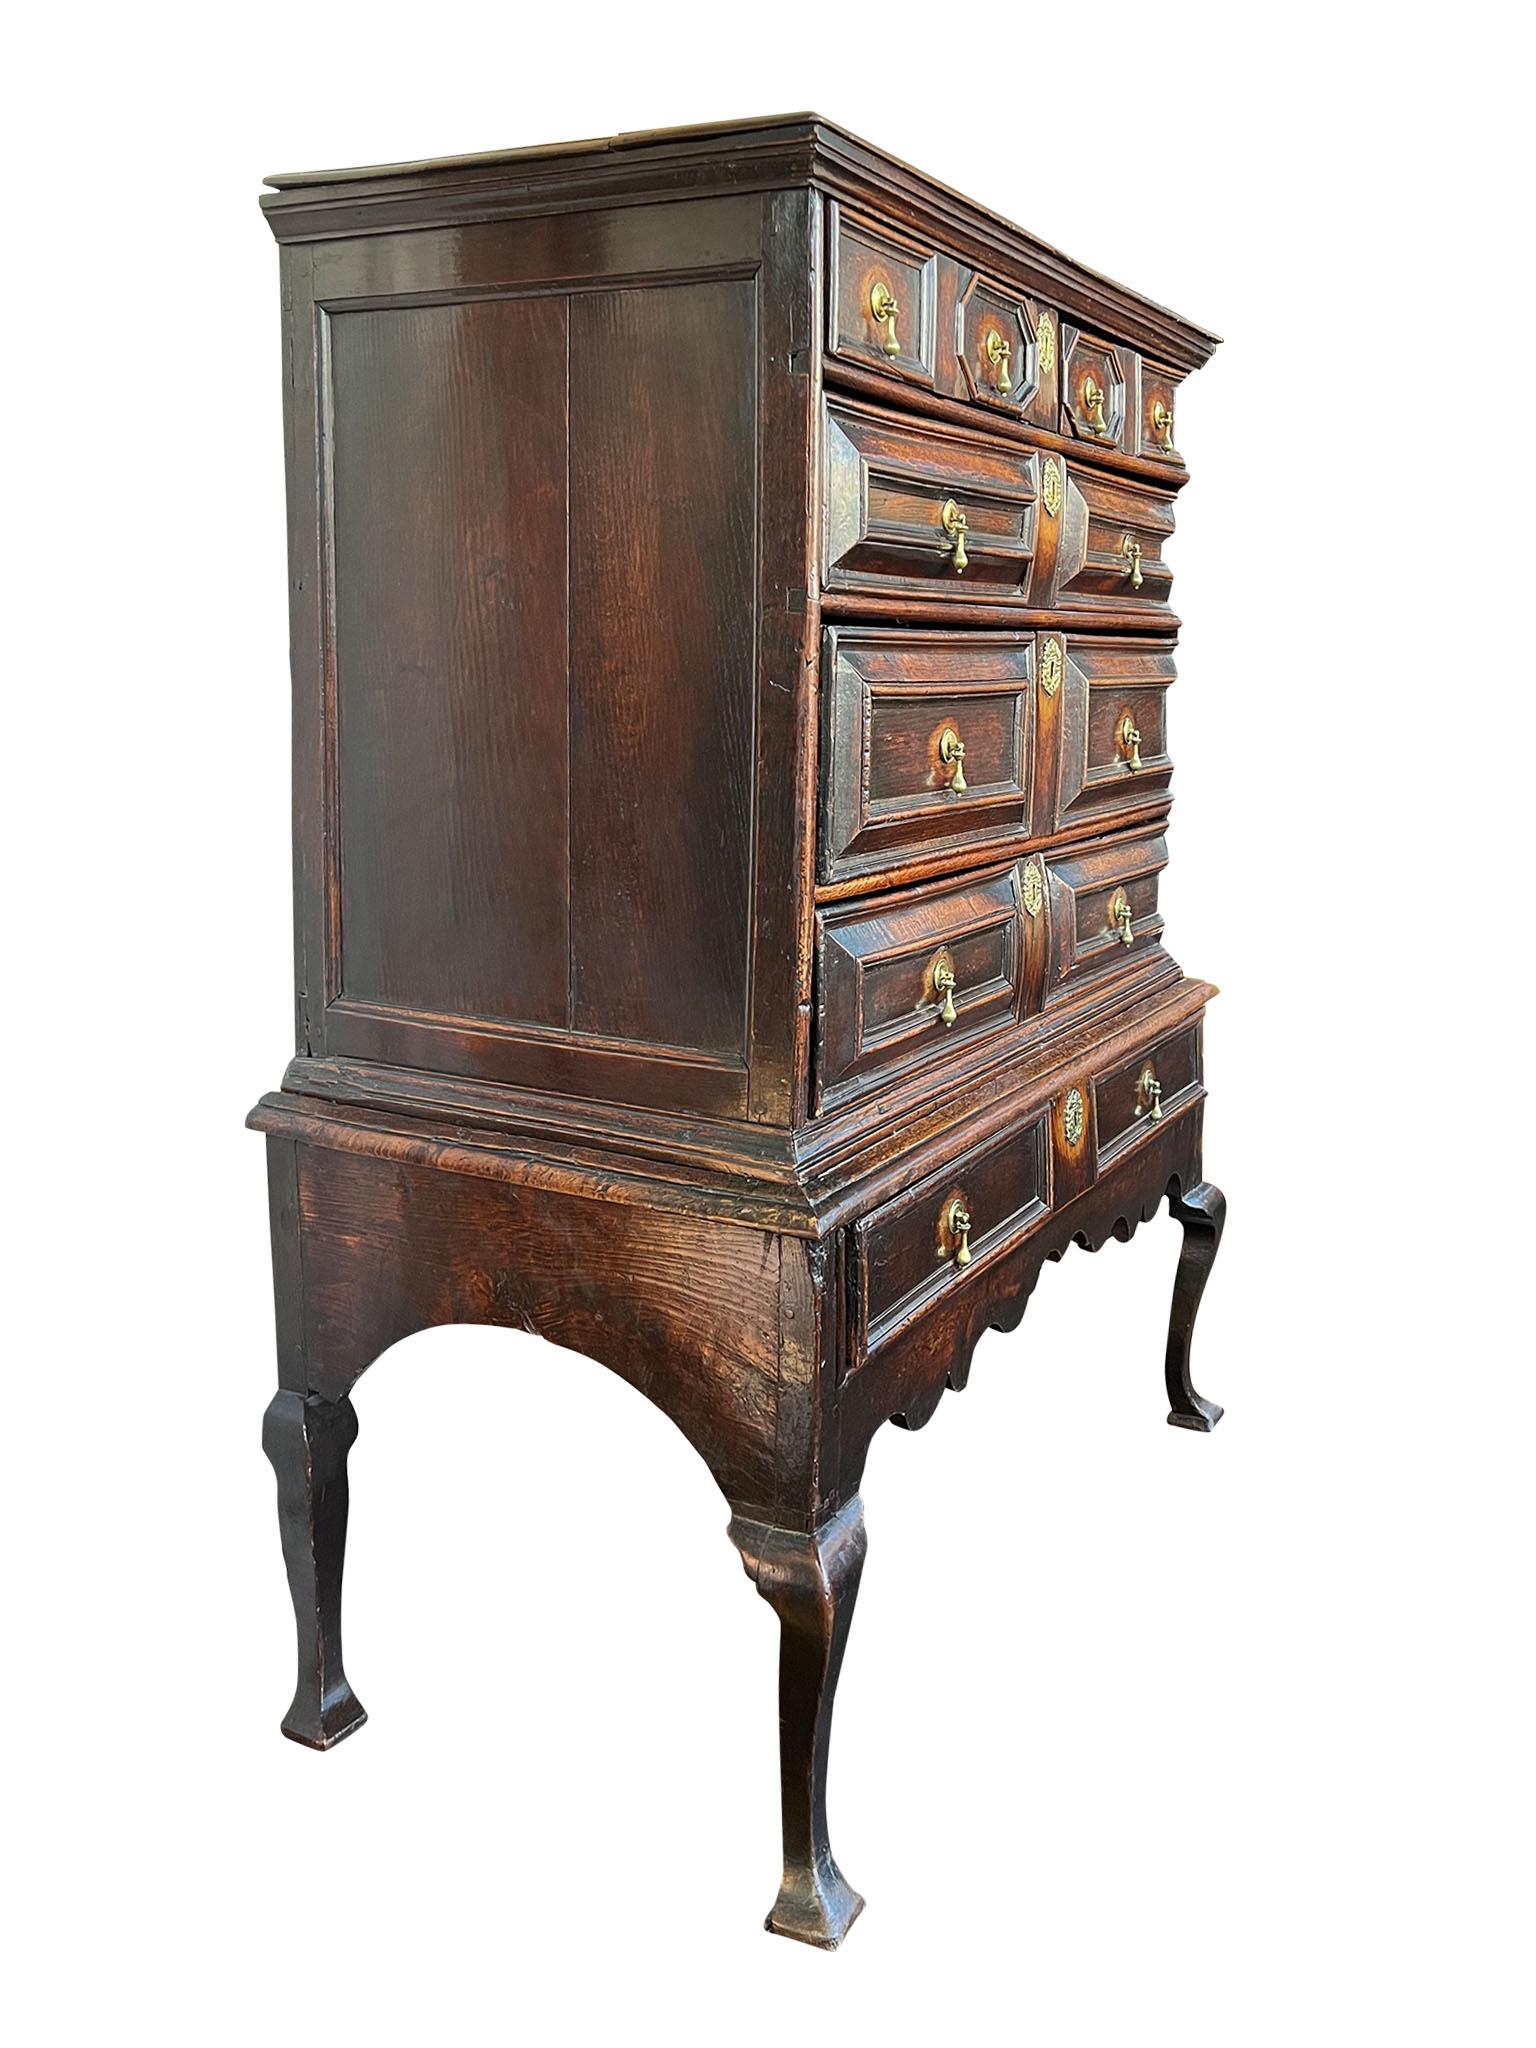 Exceptional and rare Queen Anne or George II era Oak Chest of Drawers on Stand, made in England circa 1720. Crafted in solid oak that has distressed into a warm honey patina over time, this two piece chest is designed with five functioning drawers